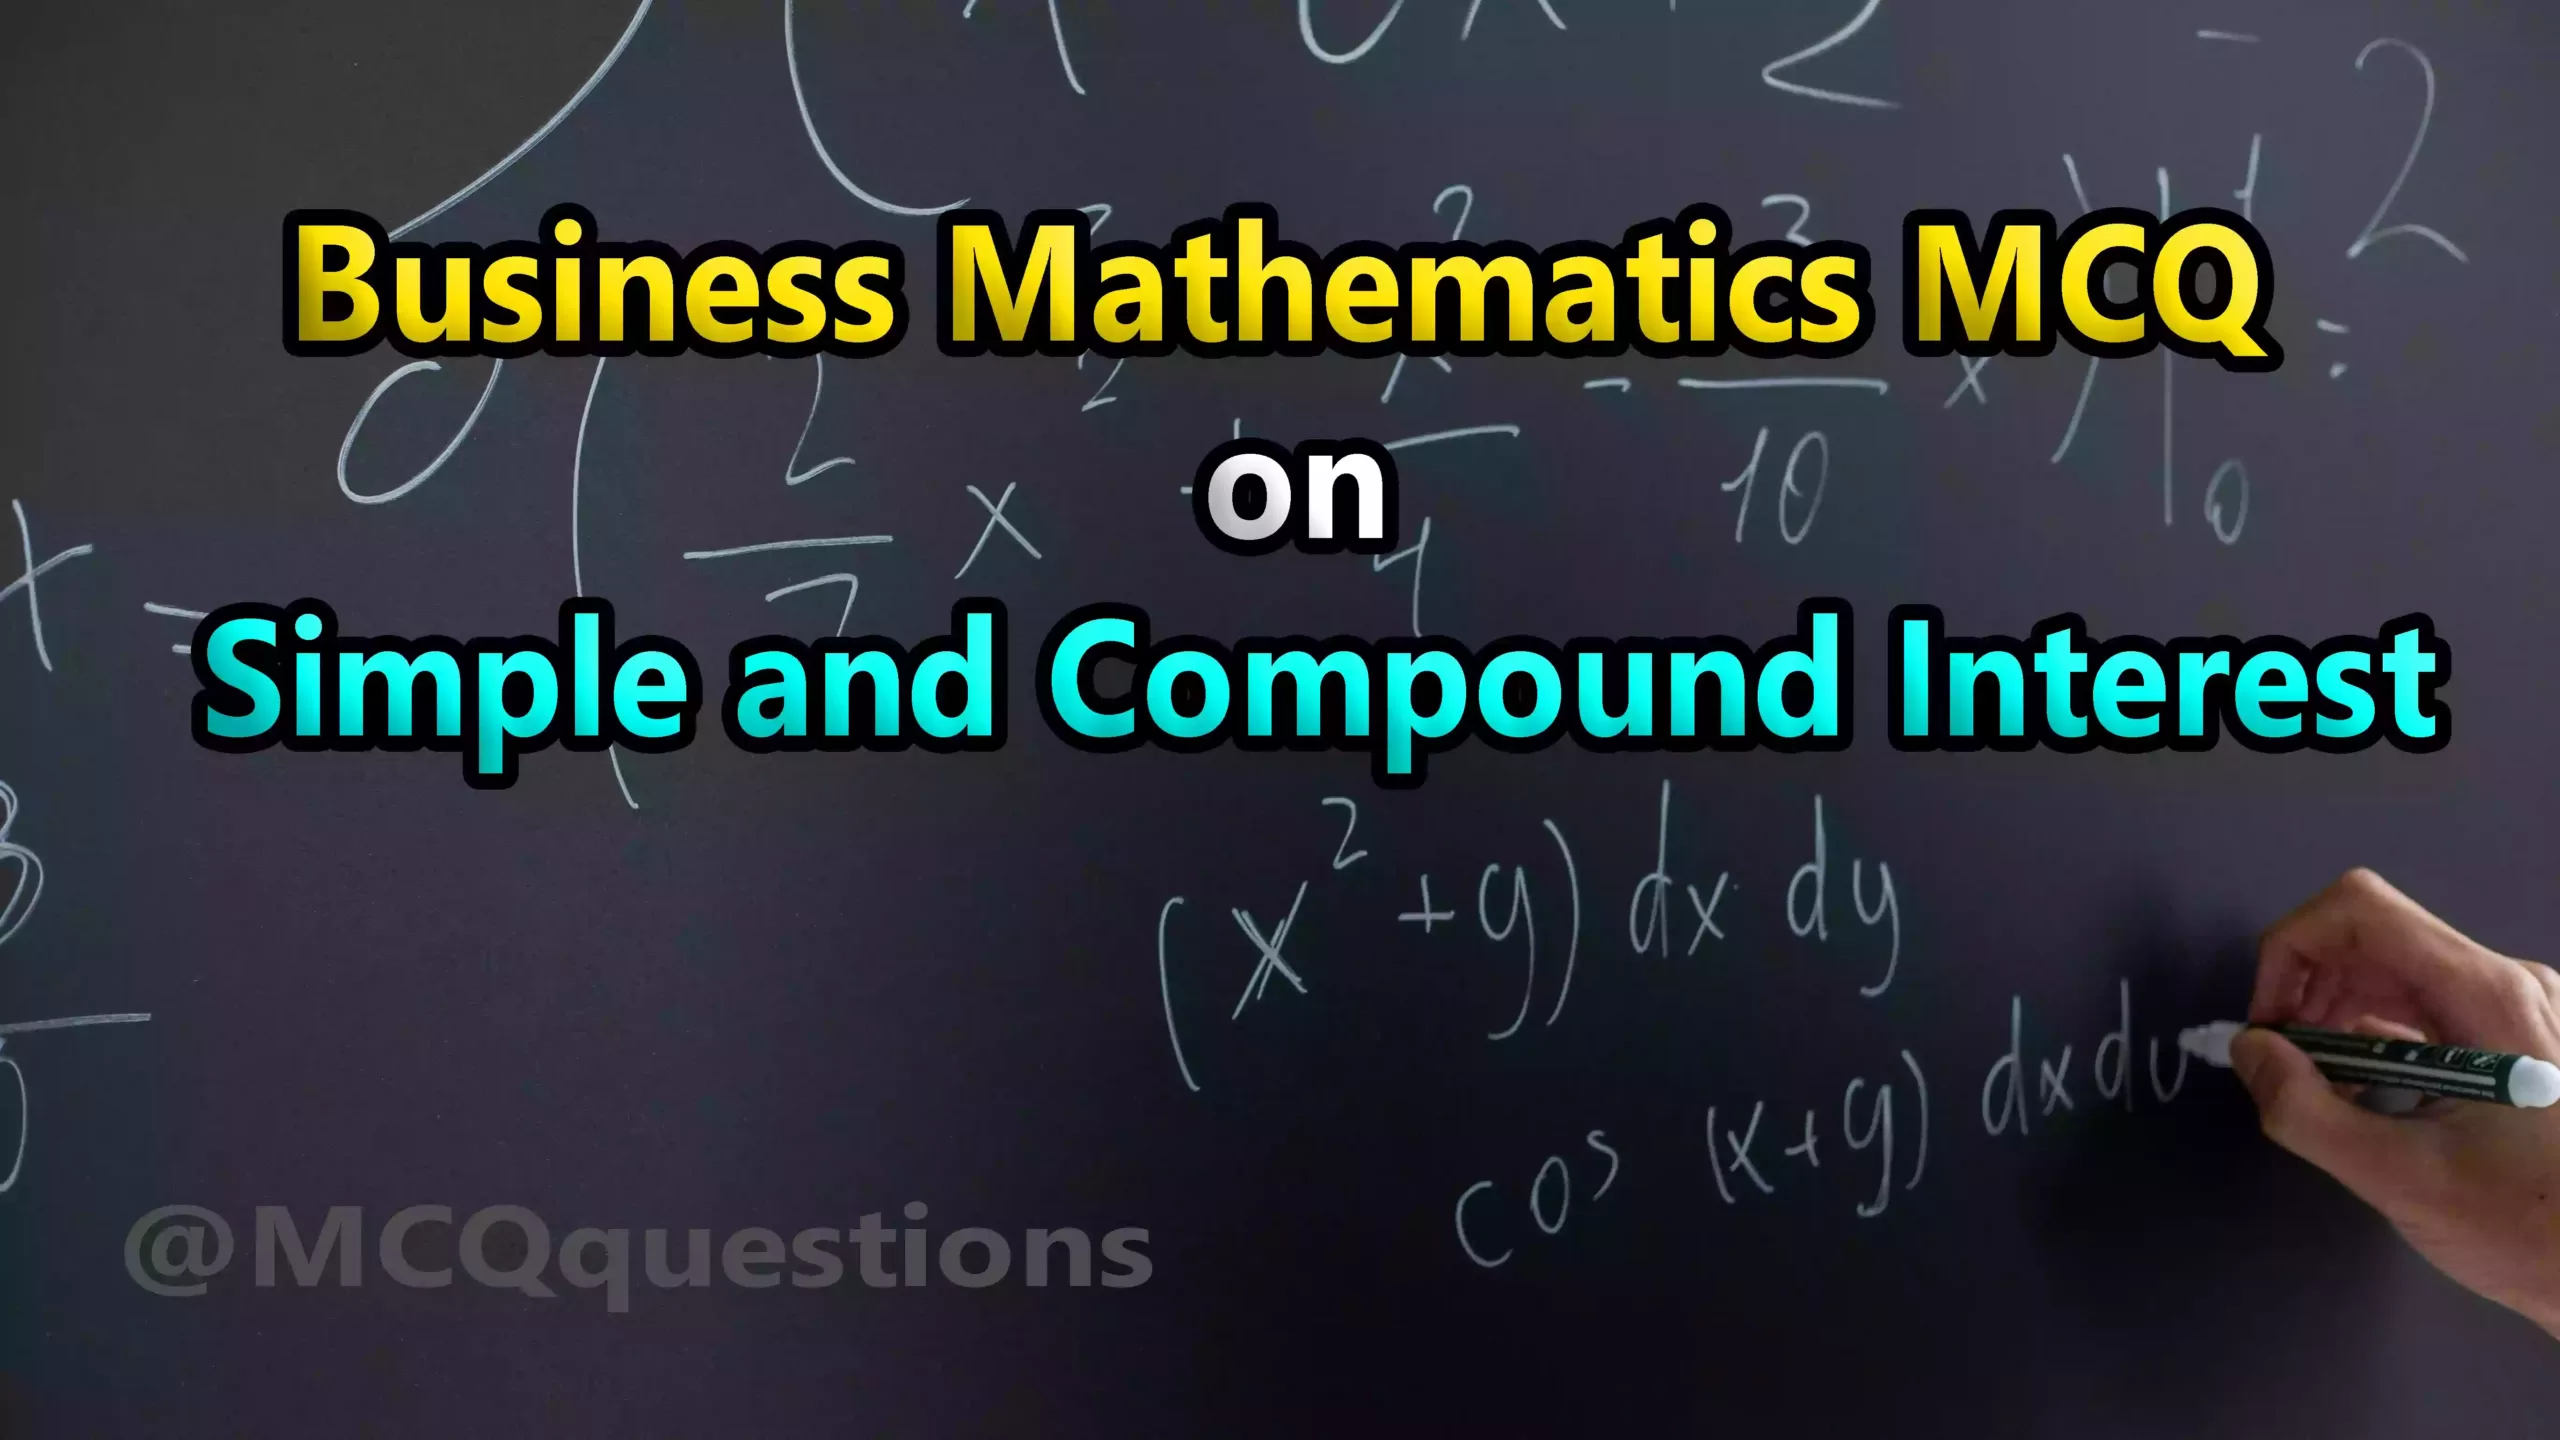 Business Mathematics MCQ on Simple and Compound interest